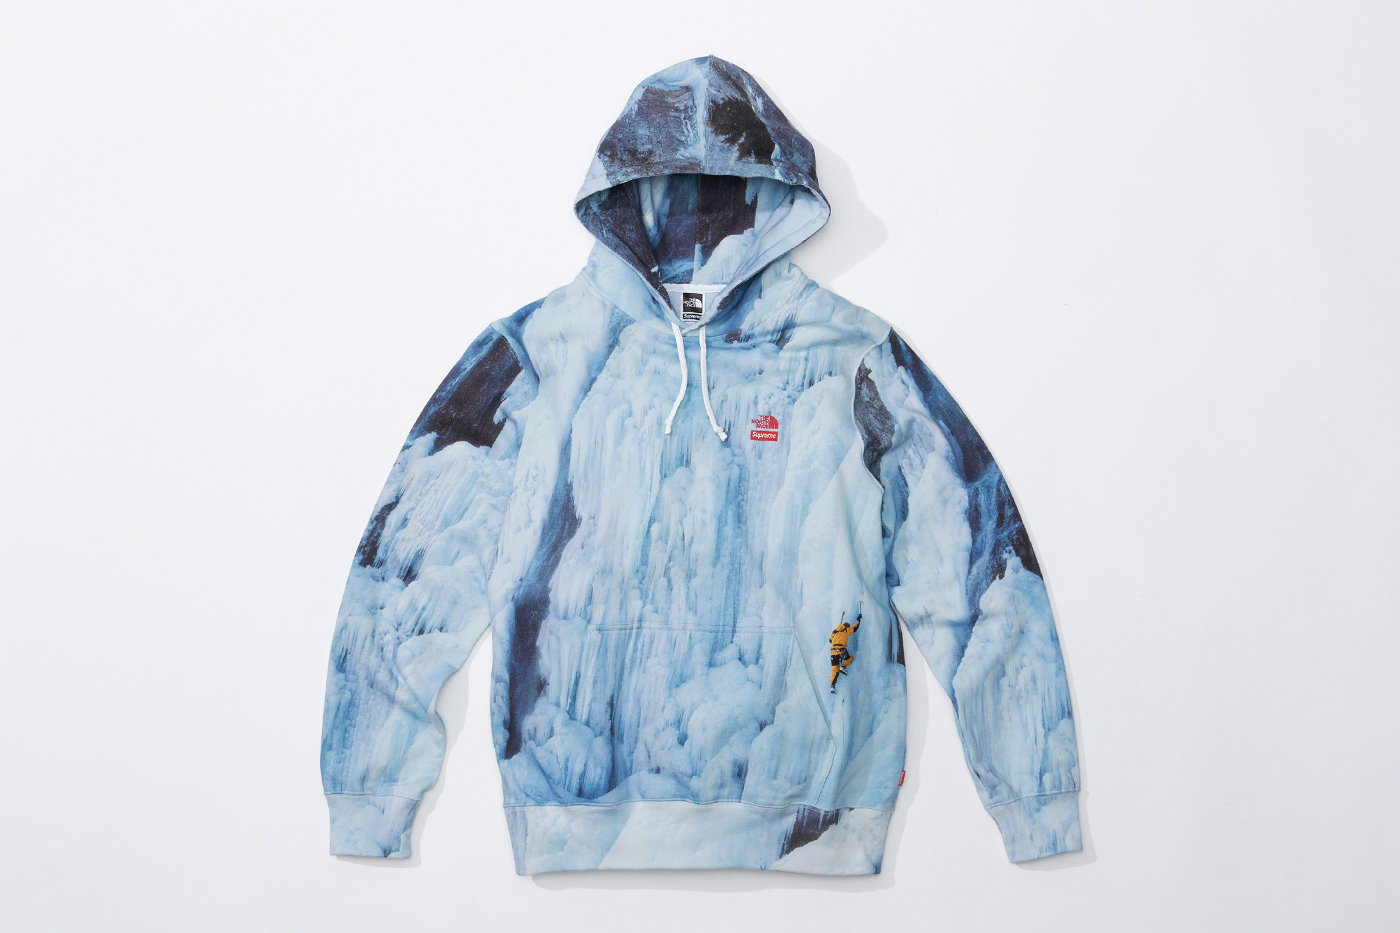 The North Face® X Supreme® Spring 2023 Collection